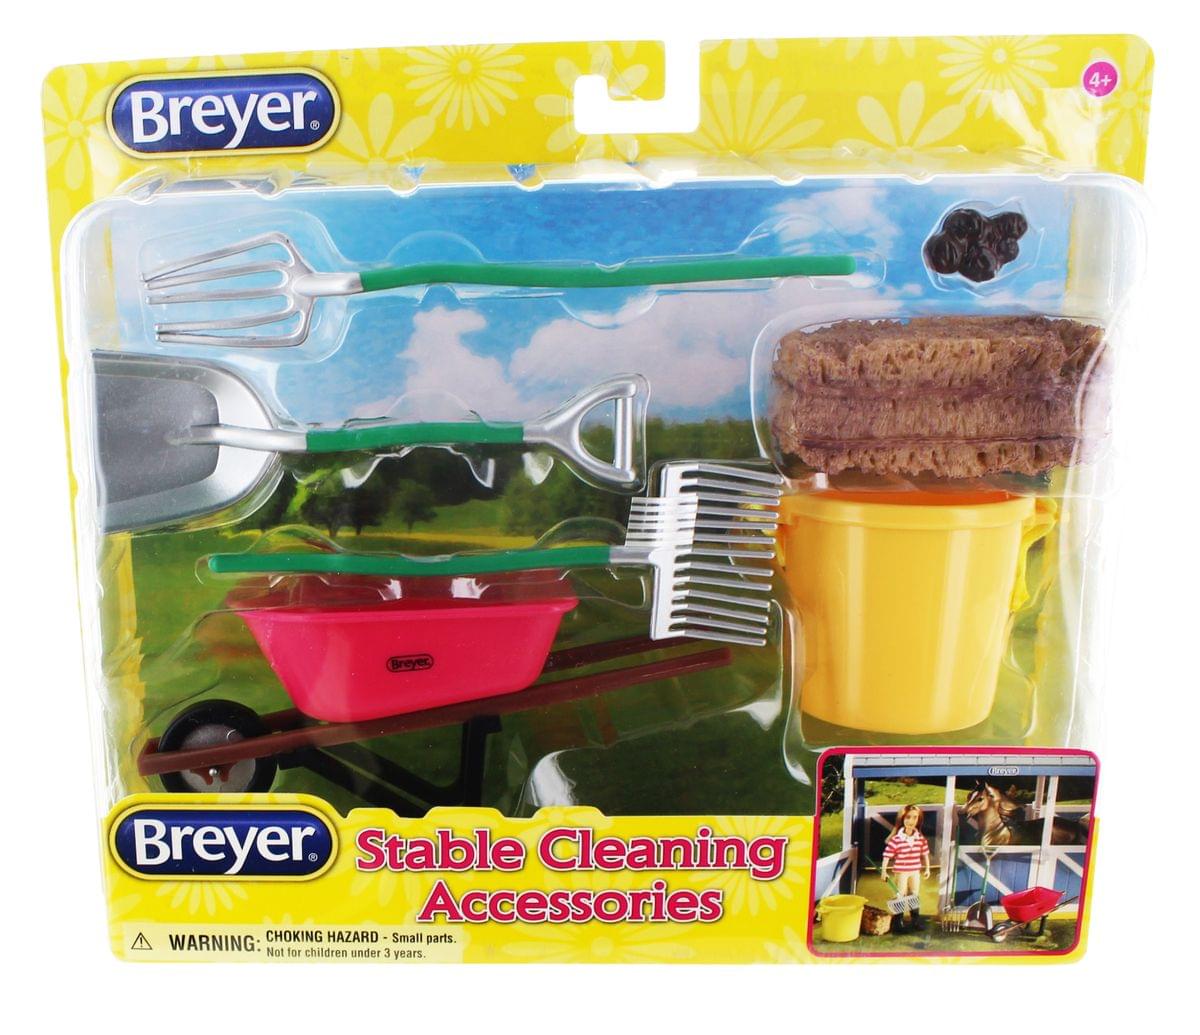 Breyer 1:12 Classics Stable Cleaning Model Horse Accessory Set